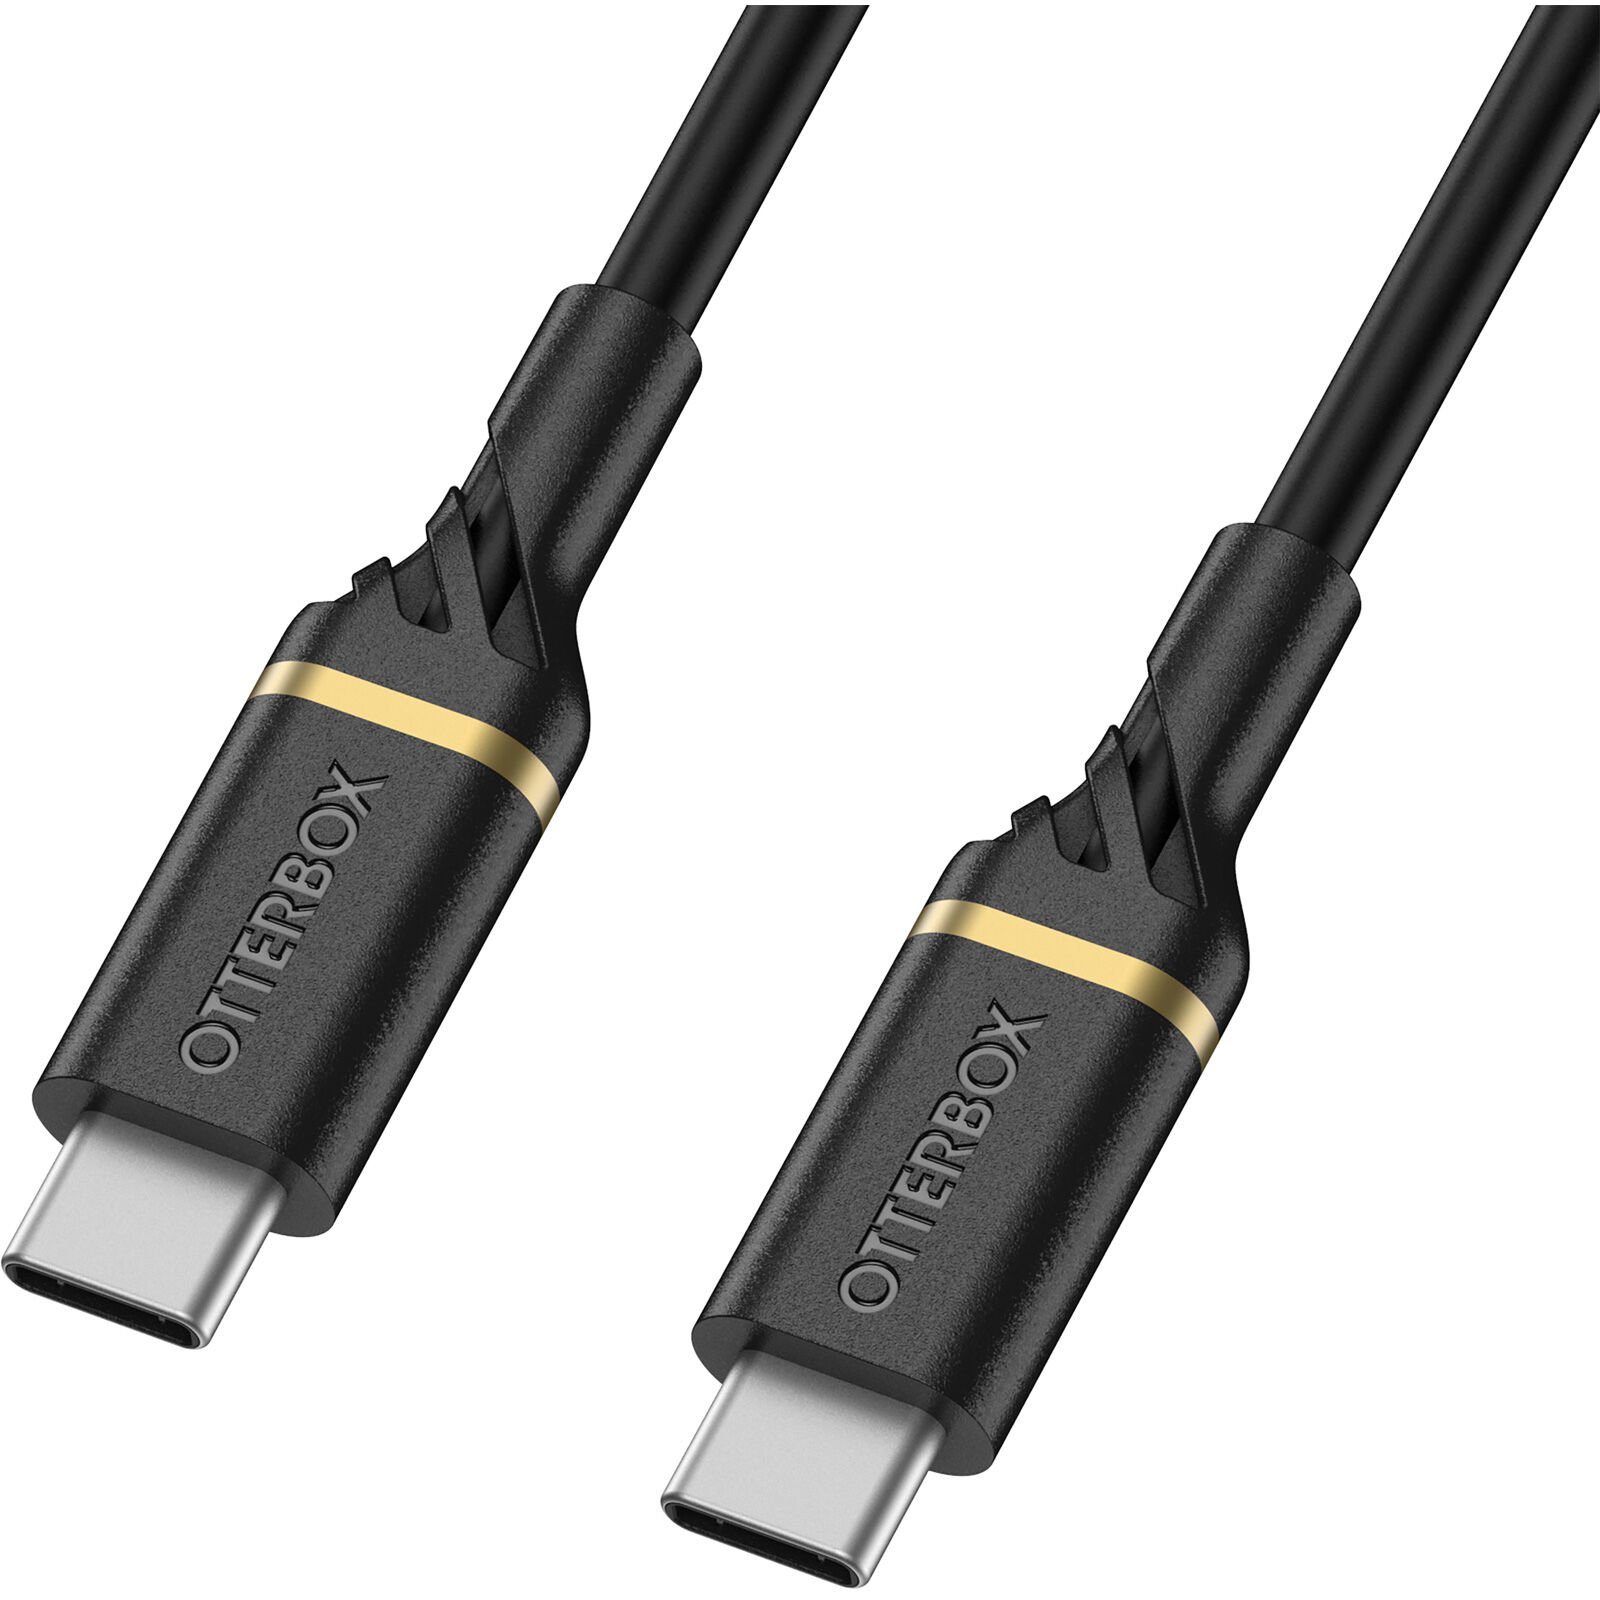 USB-C to USB-C Fast Charge Cable 2m Black